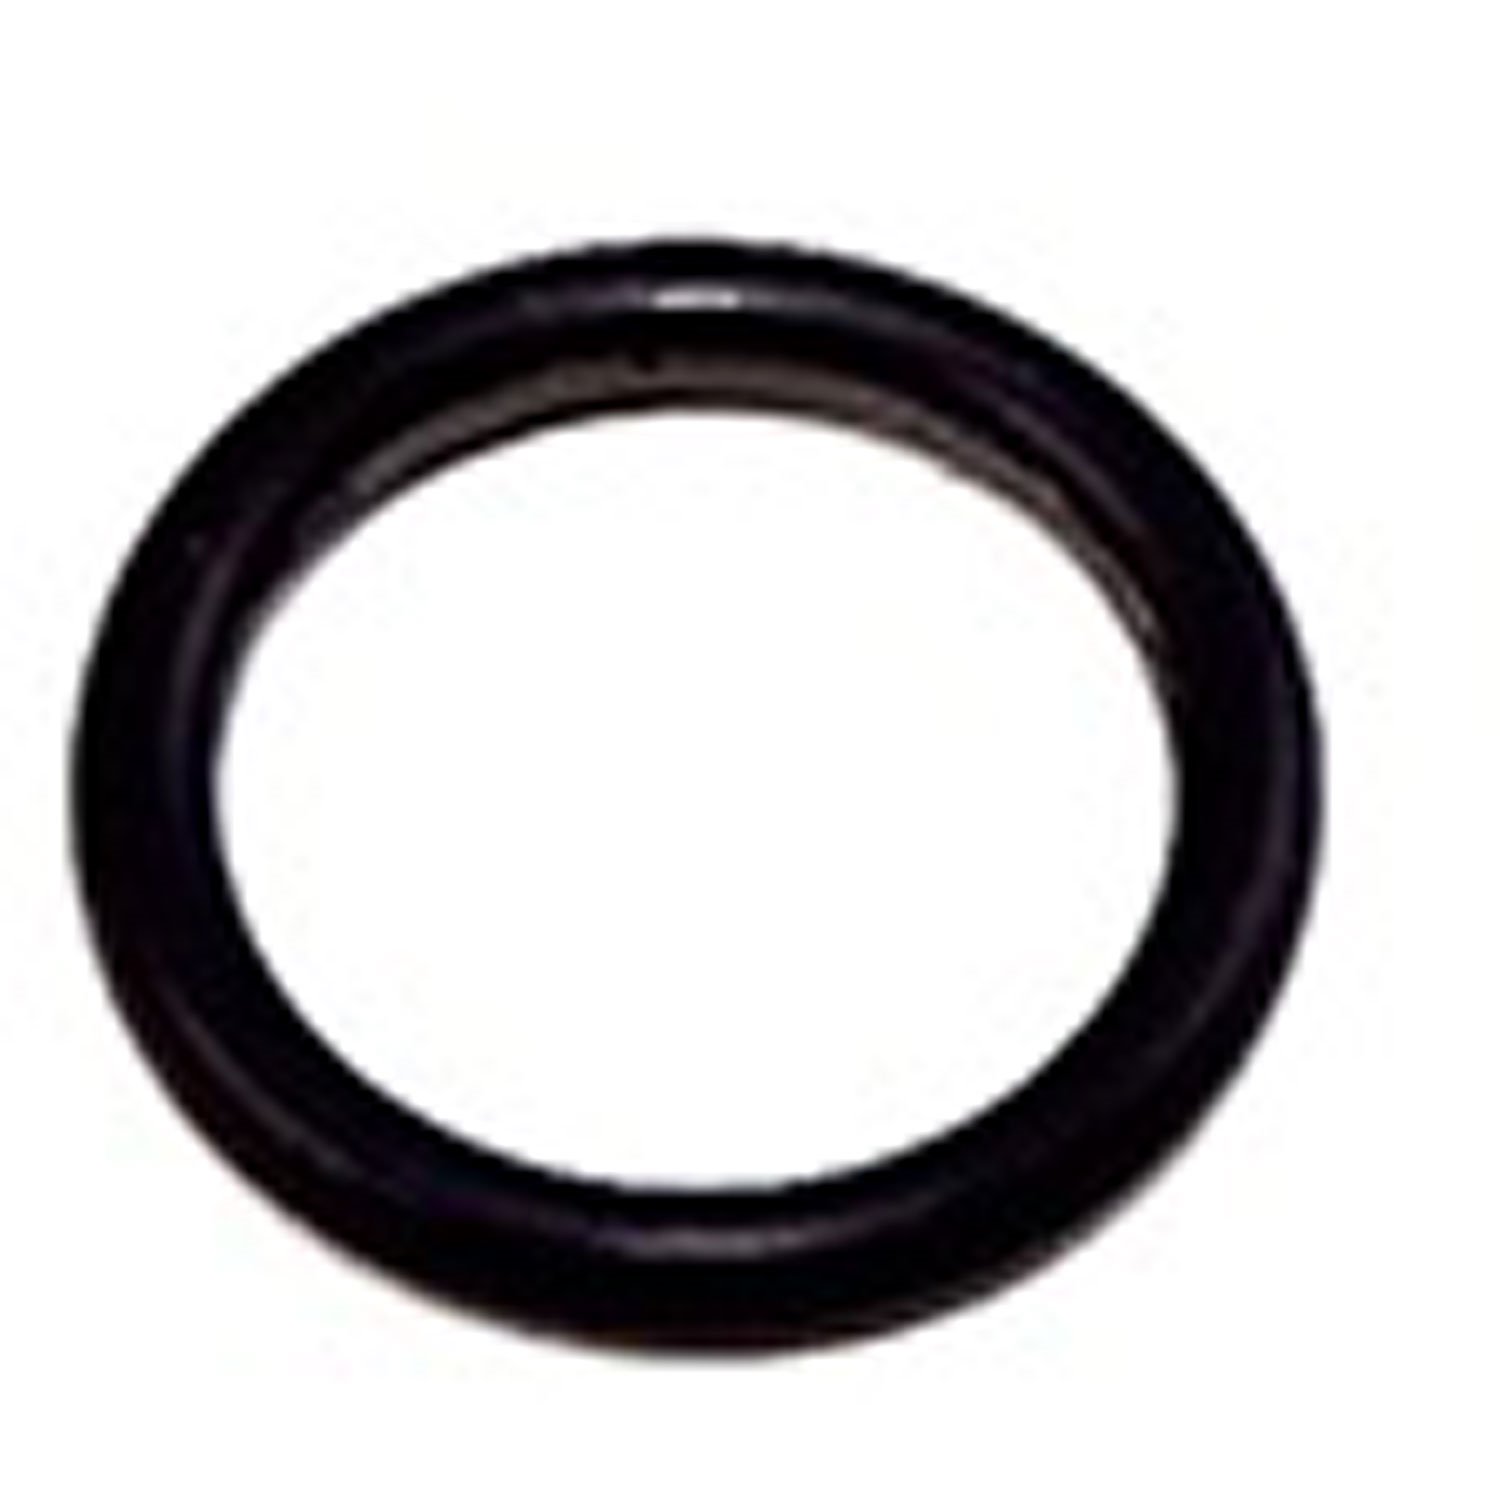 This intake valve stem seal fits the 134 ci F-head engine used in 50-51 VJ Jeepsters 50-53 Willys Tr